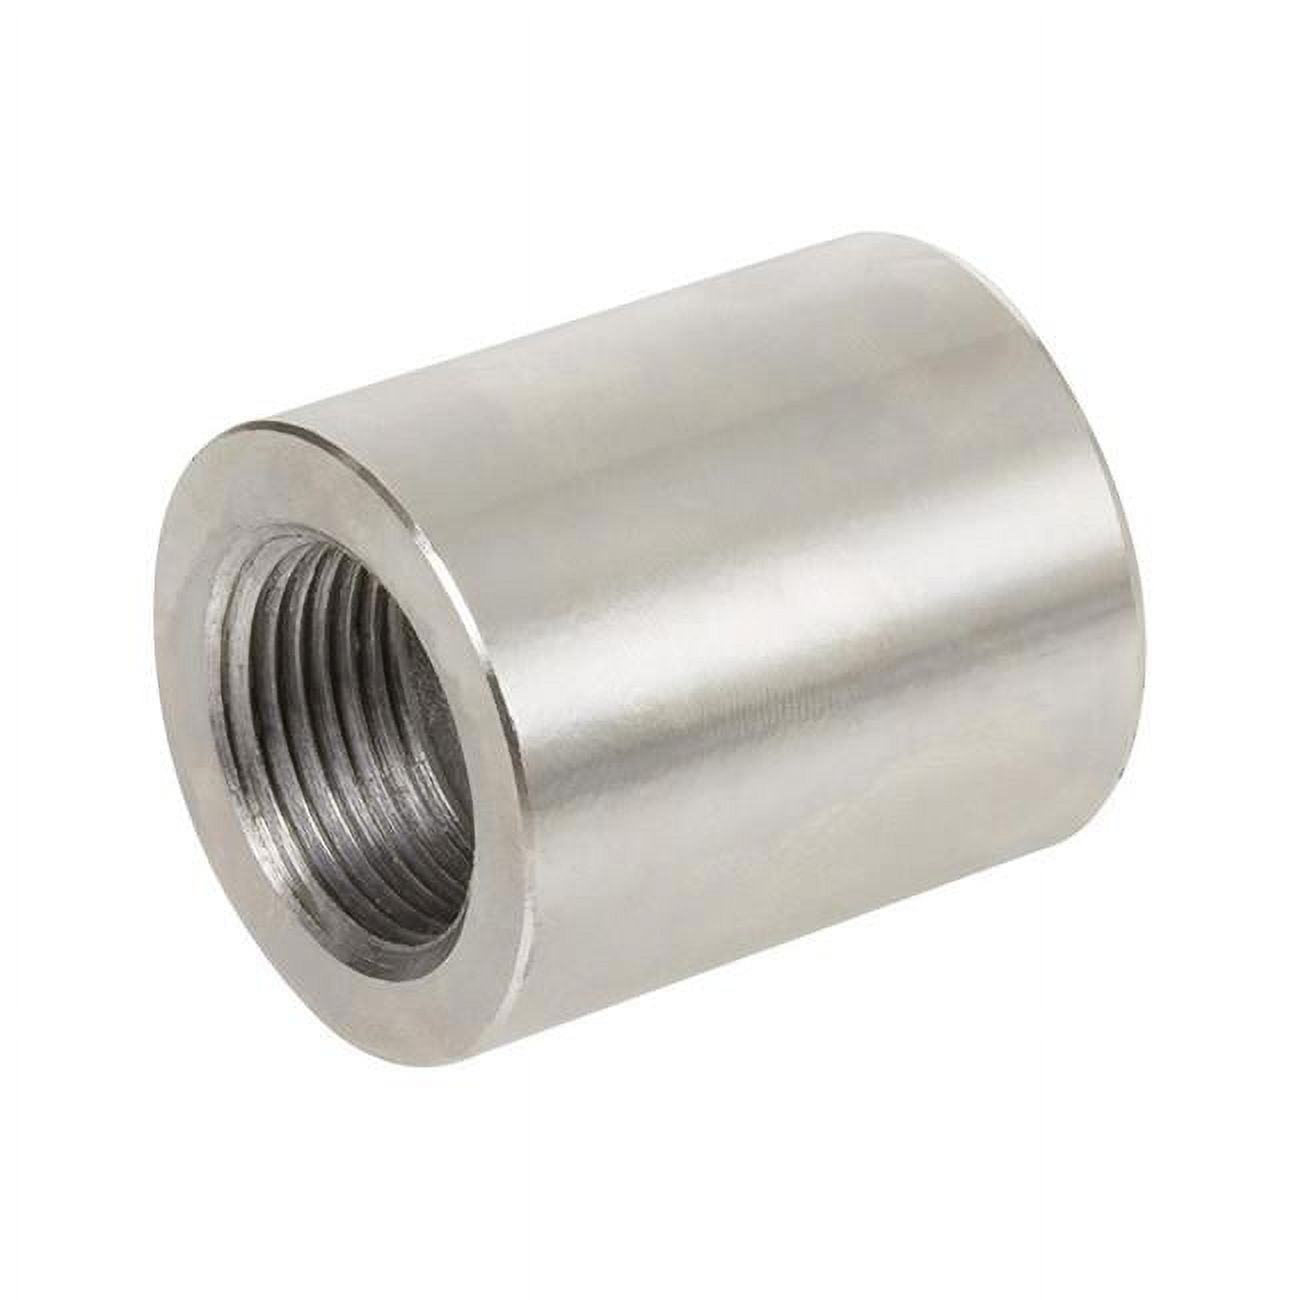 4868220 Stainless Steel Reducing Coupling - 1.25 In. X 1 Dia.